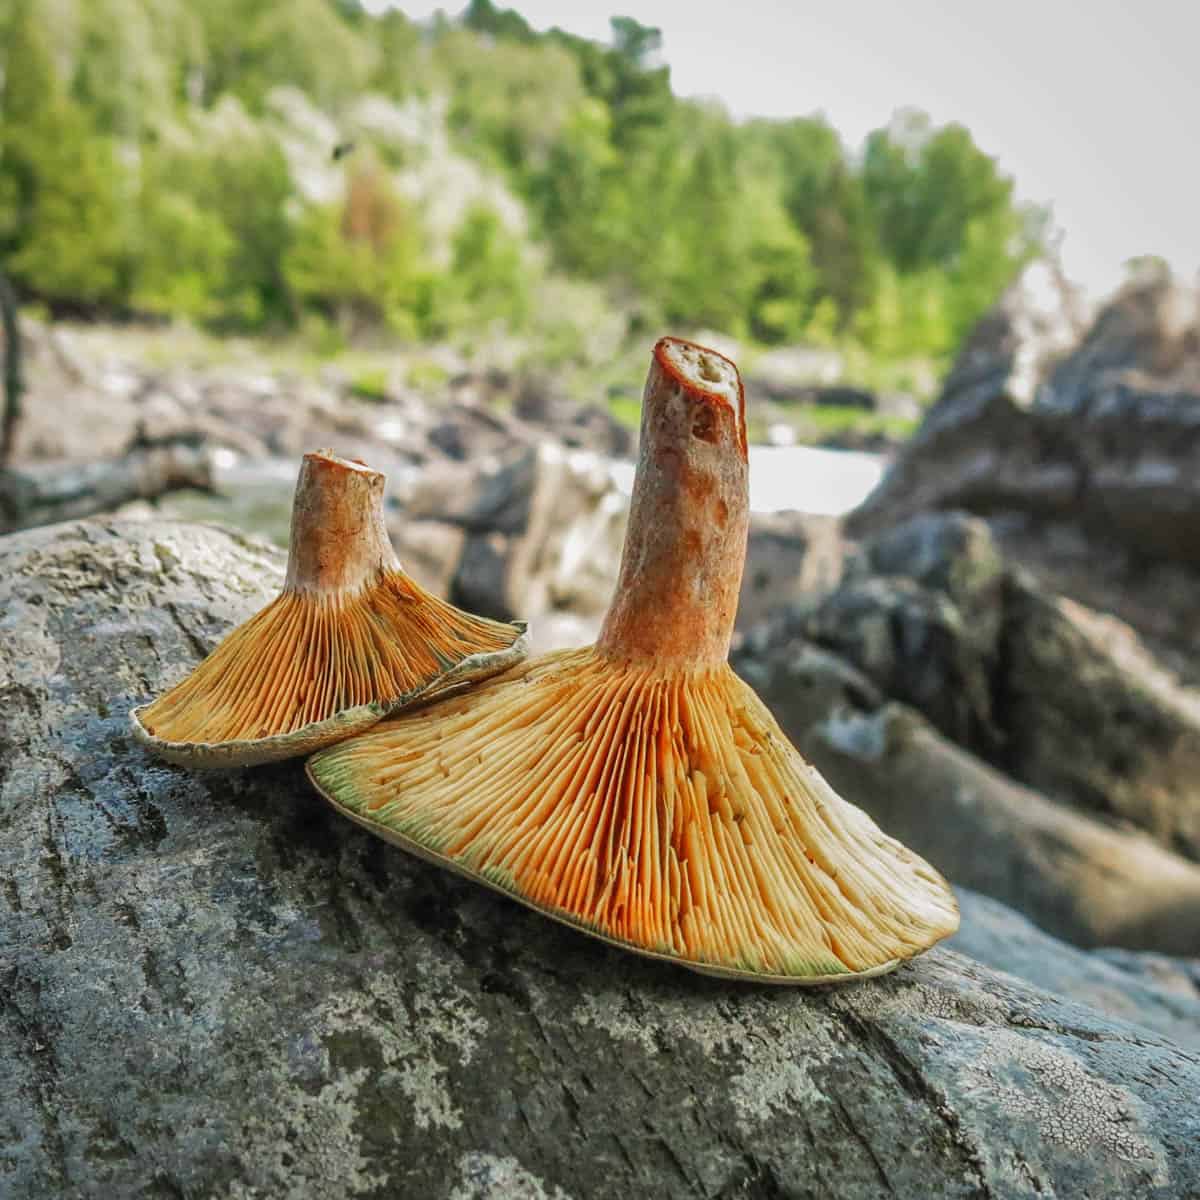 orange mushrooms with green staining on a rock 